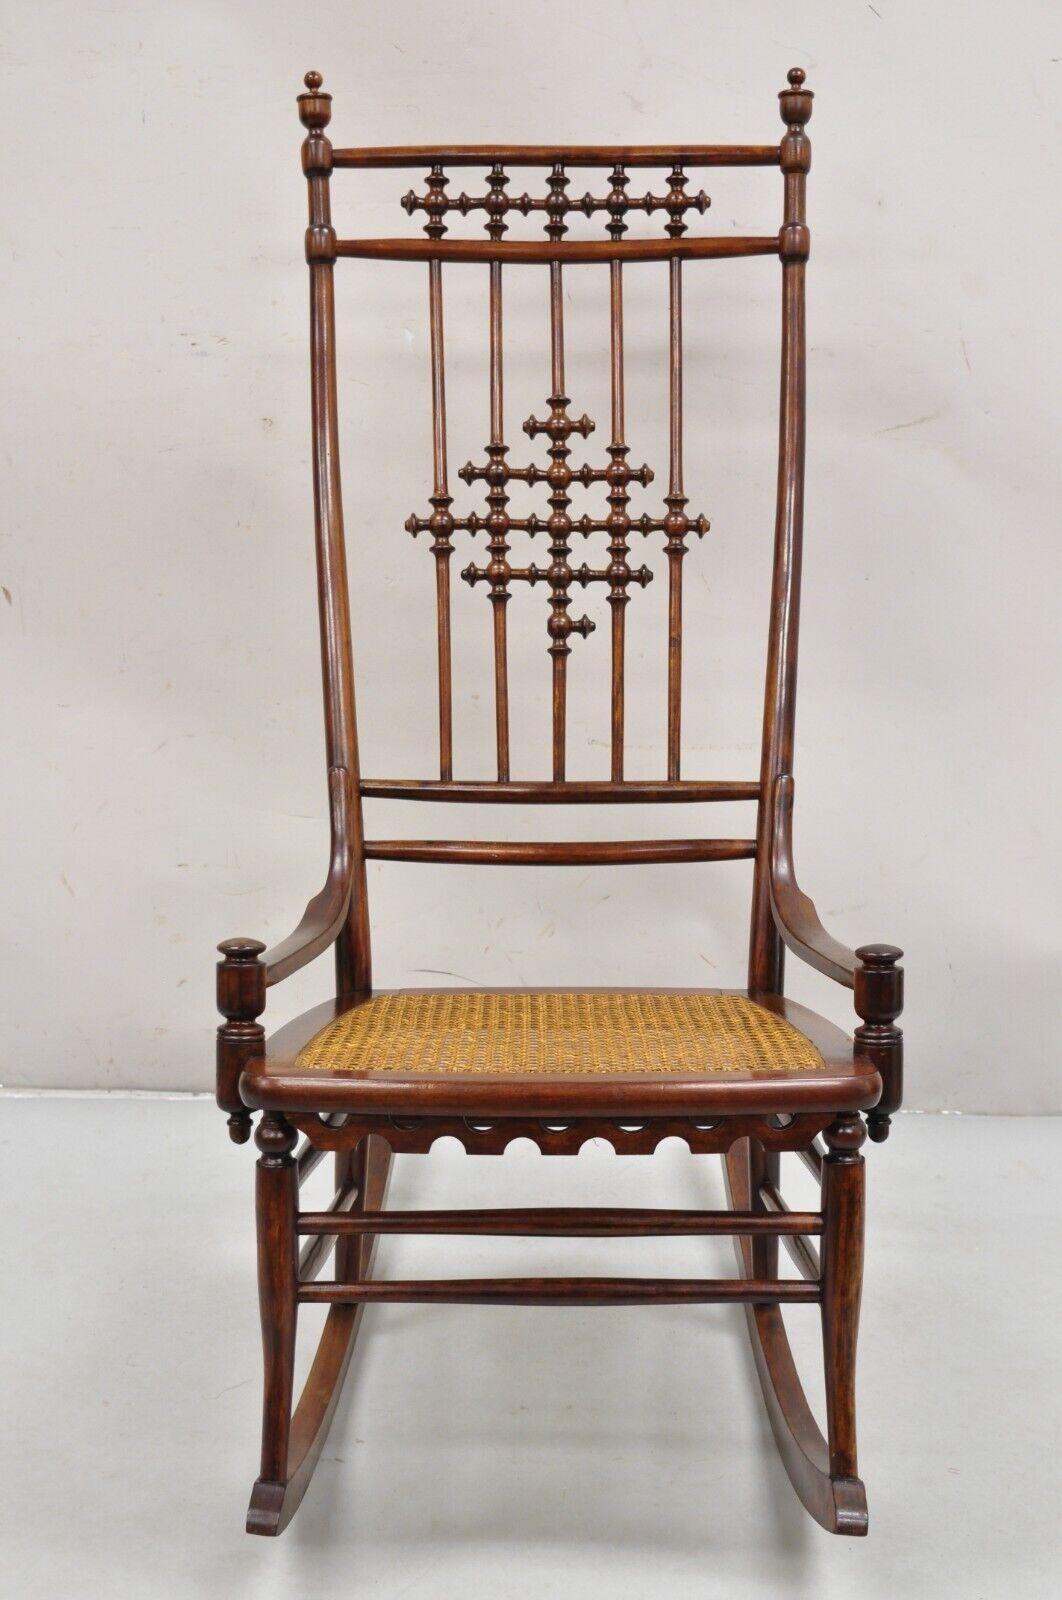 Victorian Aesthetic Movement Chestnut Stick & Ball Spindle Rocker Rocking Chair For Sale 3